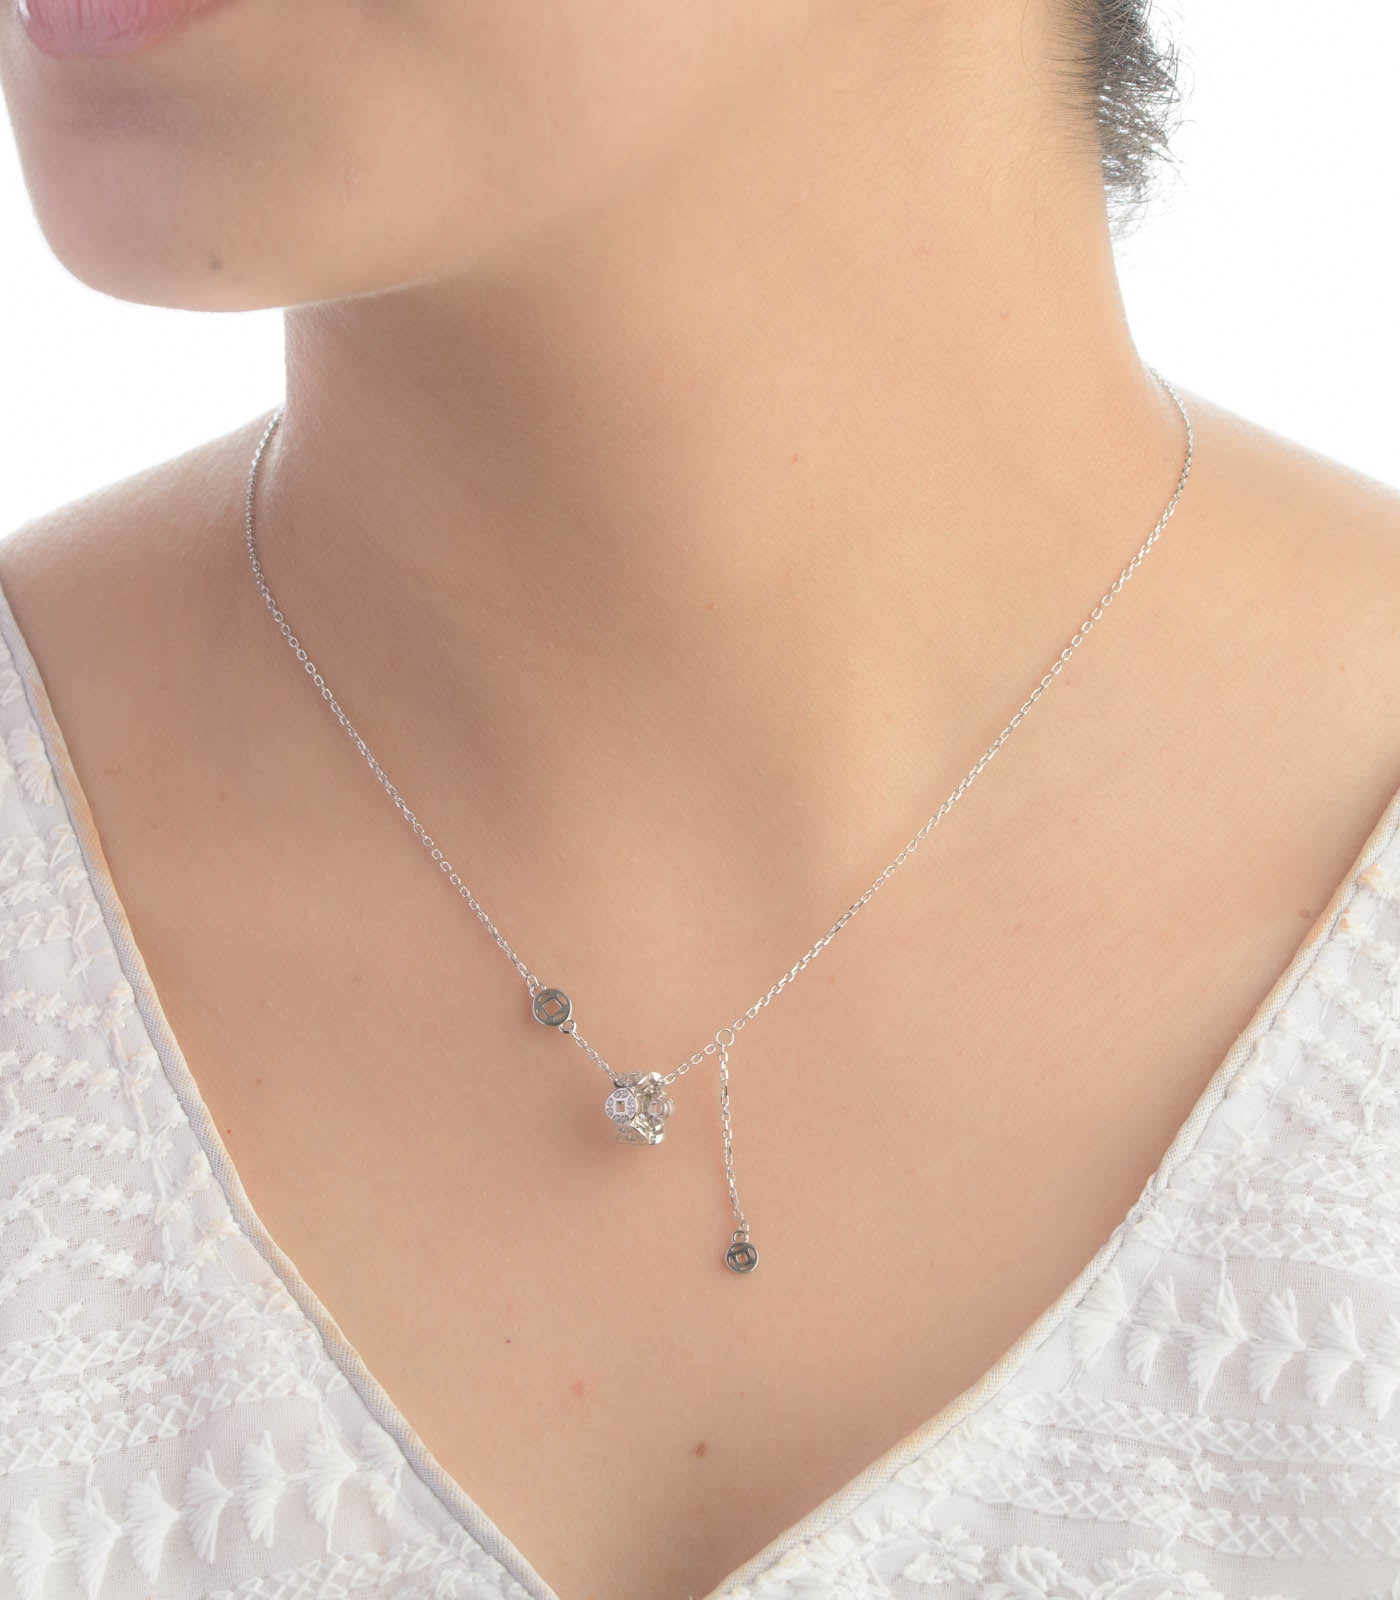 Dangling charm Necklace (Silver)